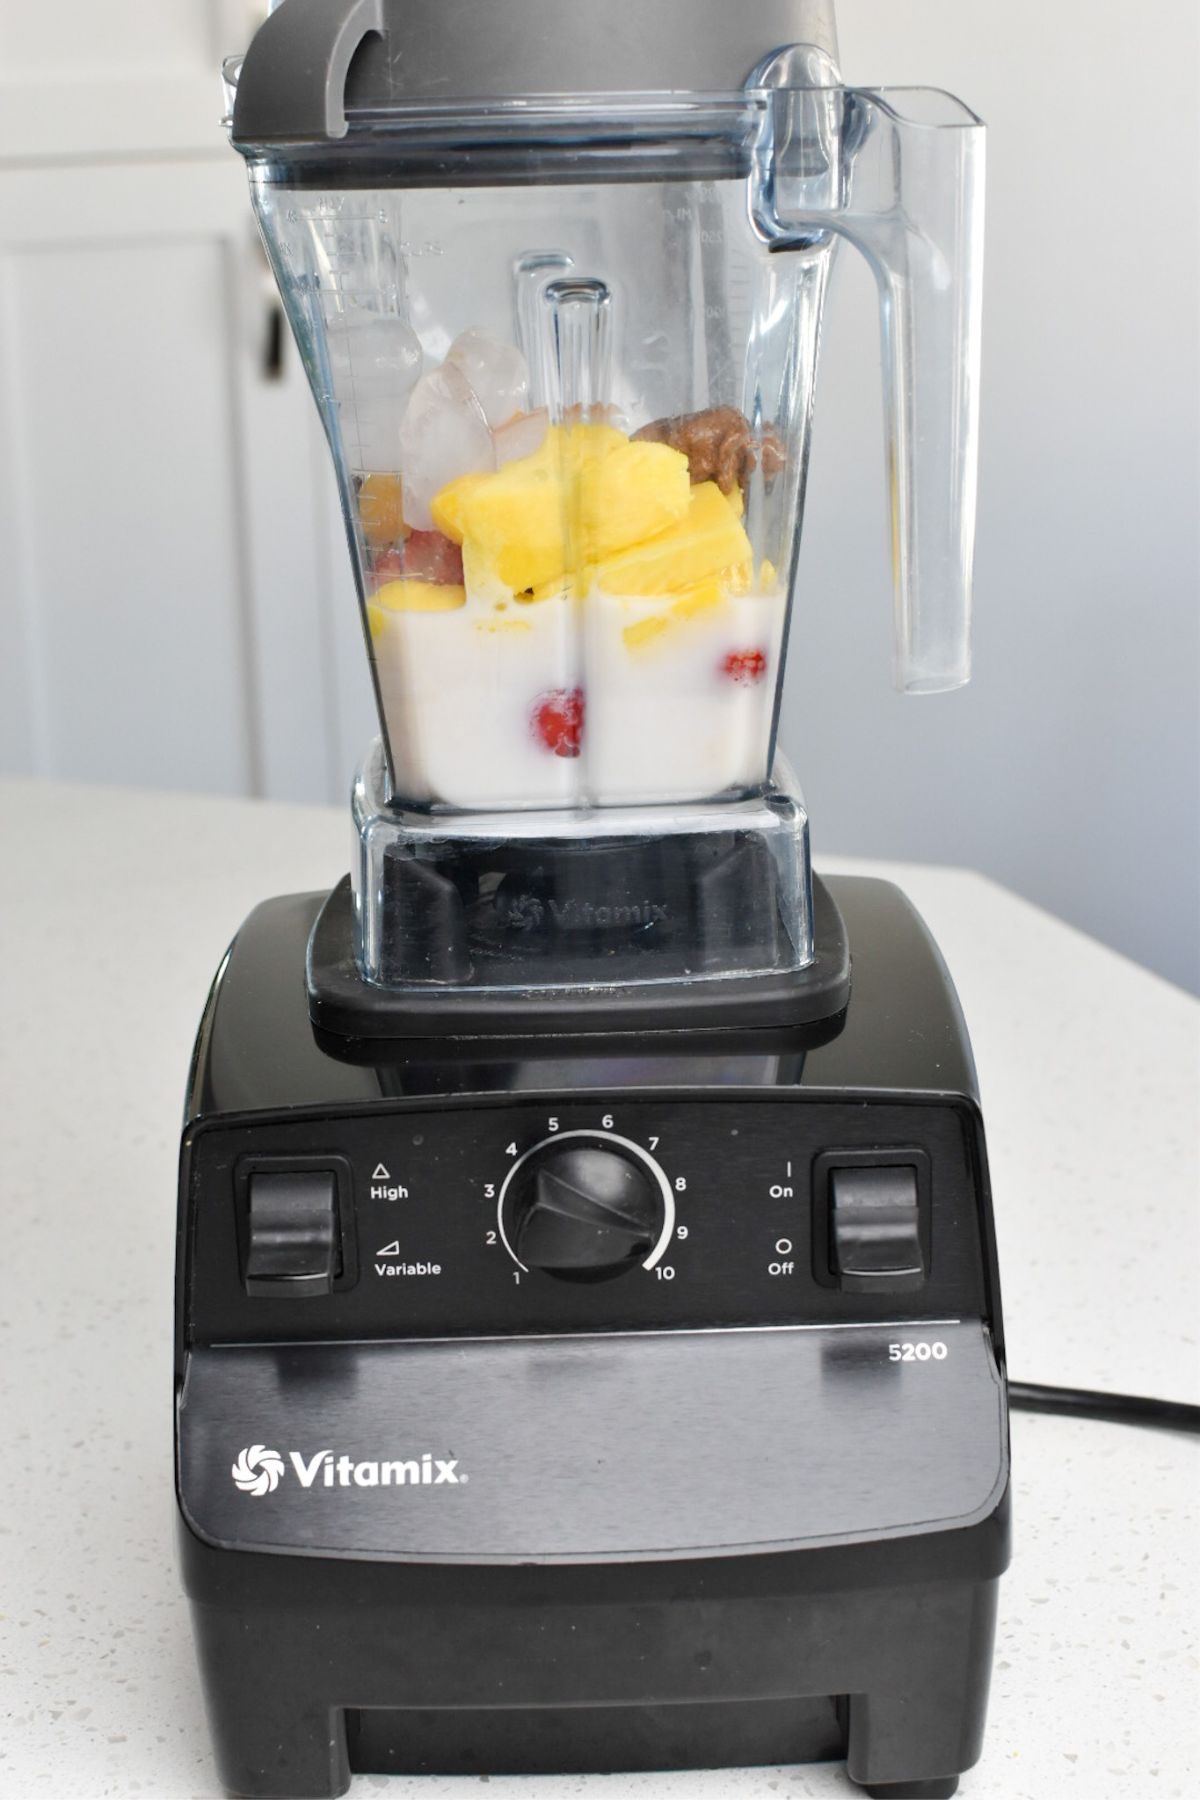 Fruit and almond milk in a Vitamix blender.